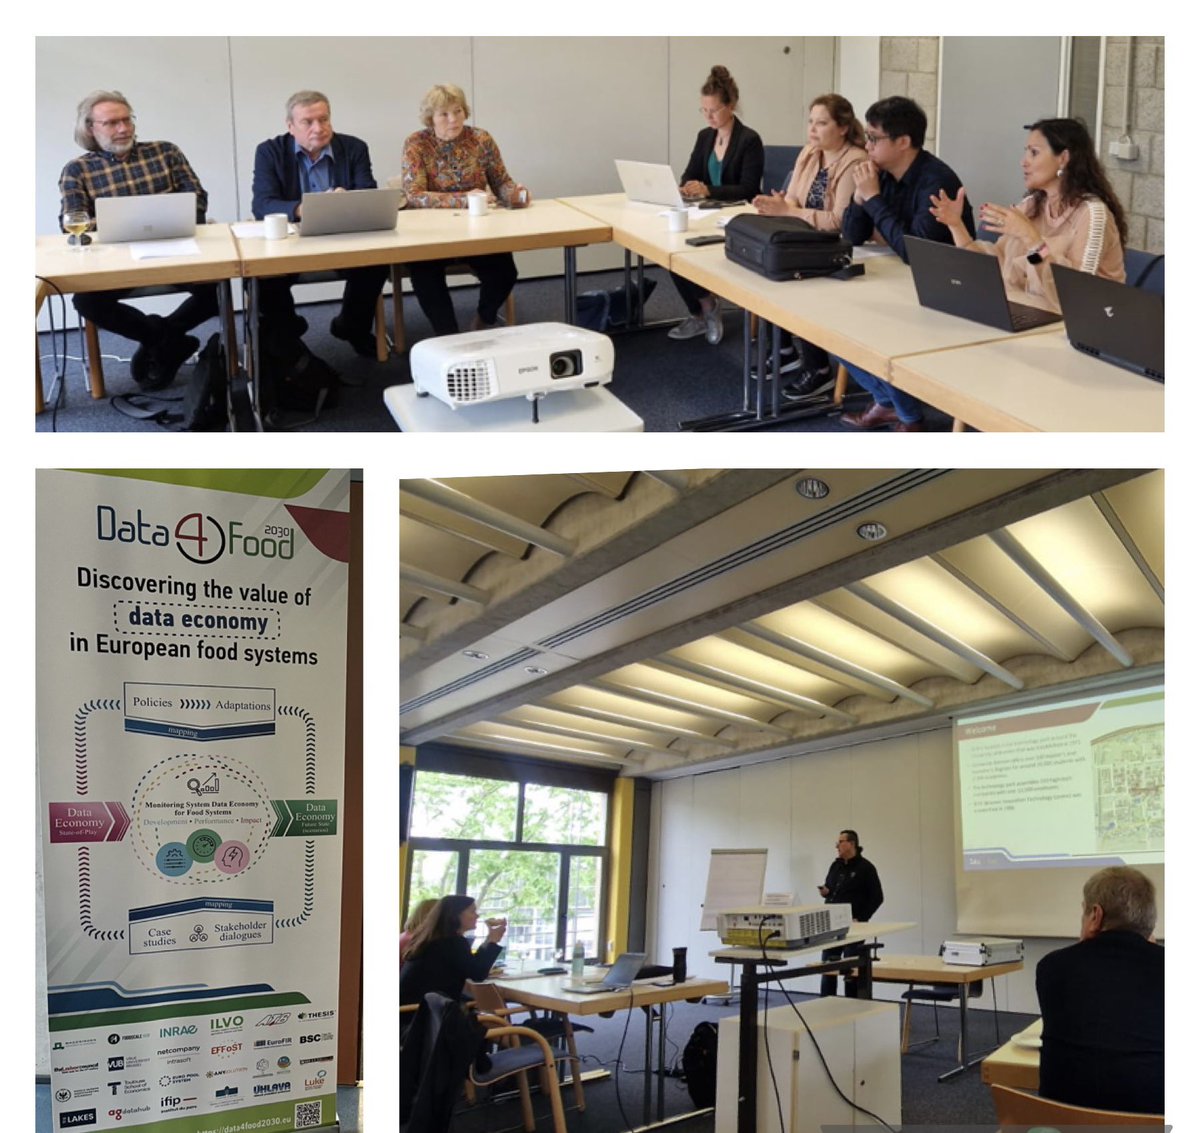 Very interesting meeting of @Data4Food2030 project organised by @HSundmaeker where we were setting the basis for the #dataspaces in #agro we’re going to put in place in 9 different places, one in #Mallorca thanks to the collaboration @camp_mallorqui @BinissalemDO @DOPLAILLEVANT